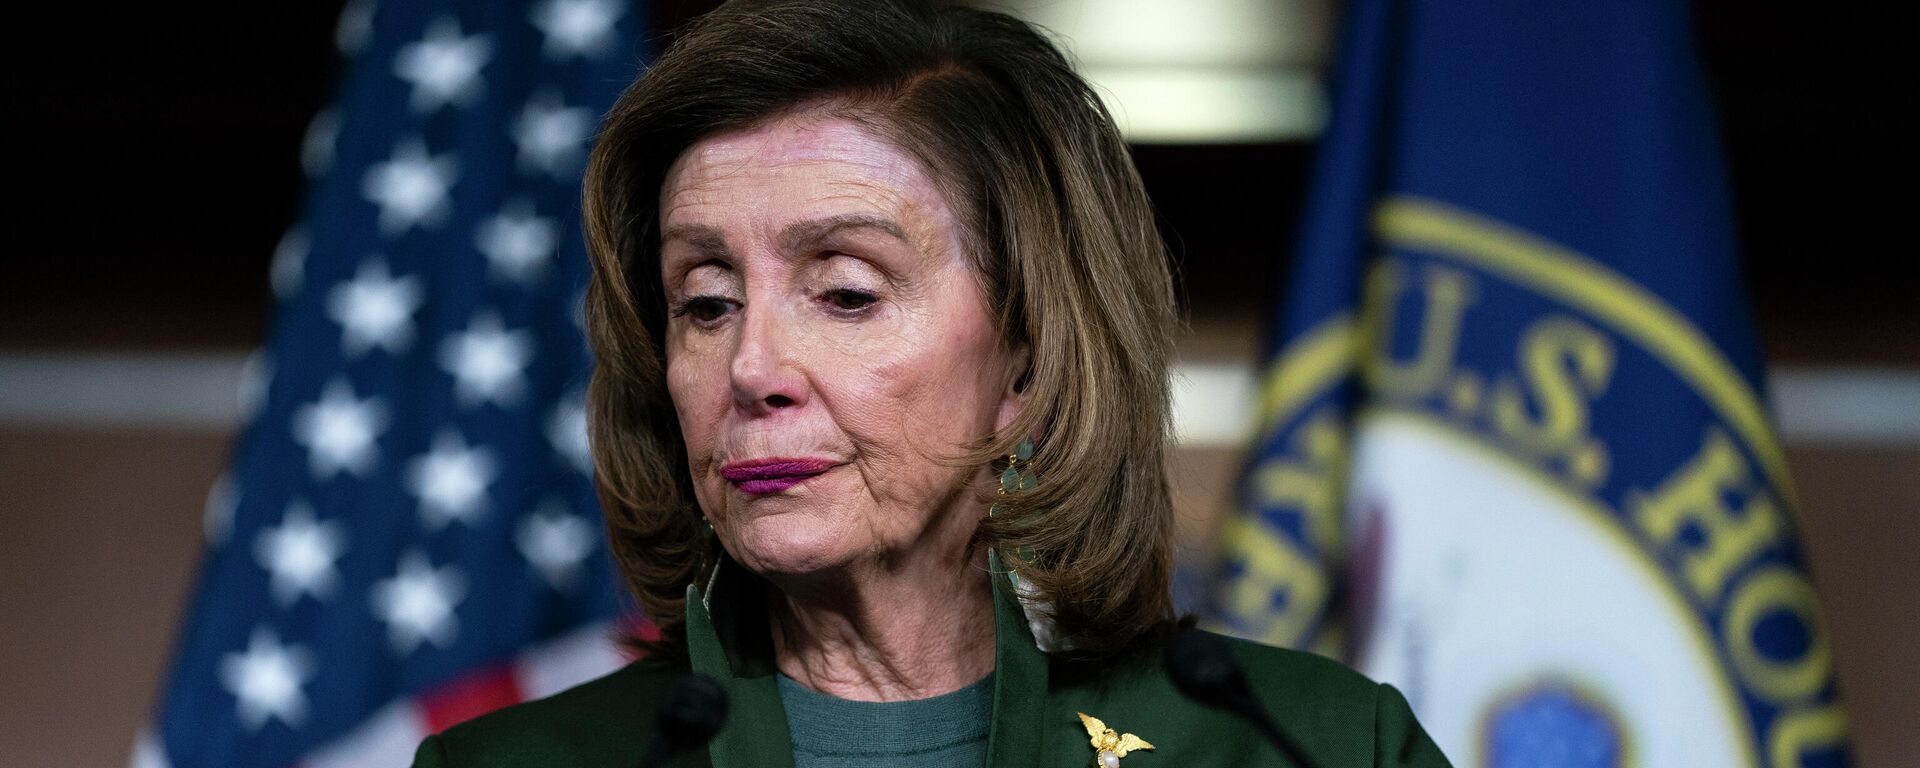 Speaker of the House Nancy Pelosi of Calif., pauses as she speaks during a news conference on Capitol Hill, Thursday, Feb. 3, 2022, in Washington - Sputnik International, 1920, 27.07.2022